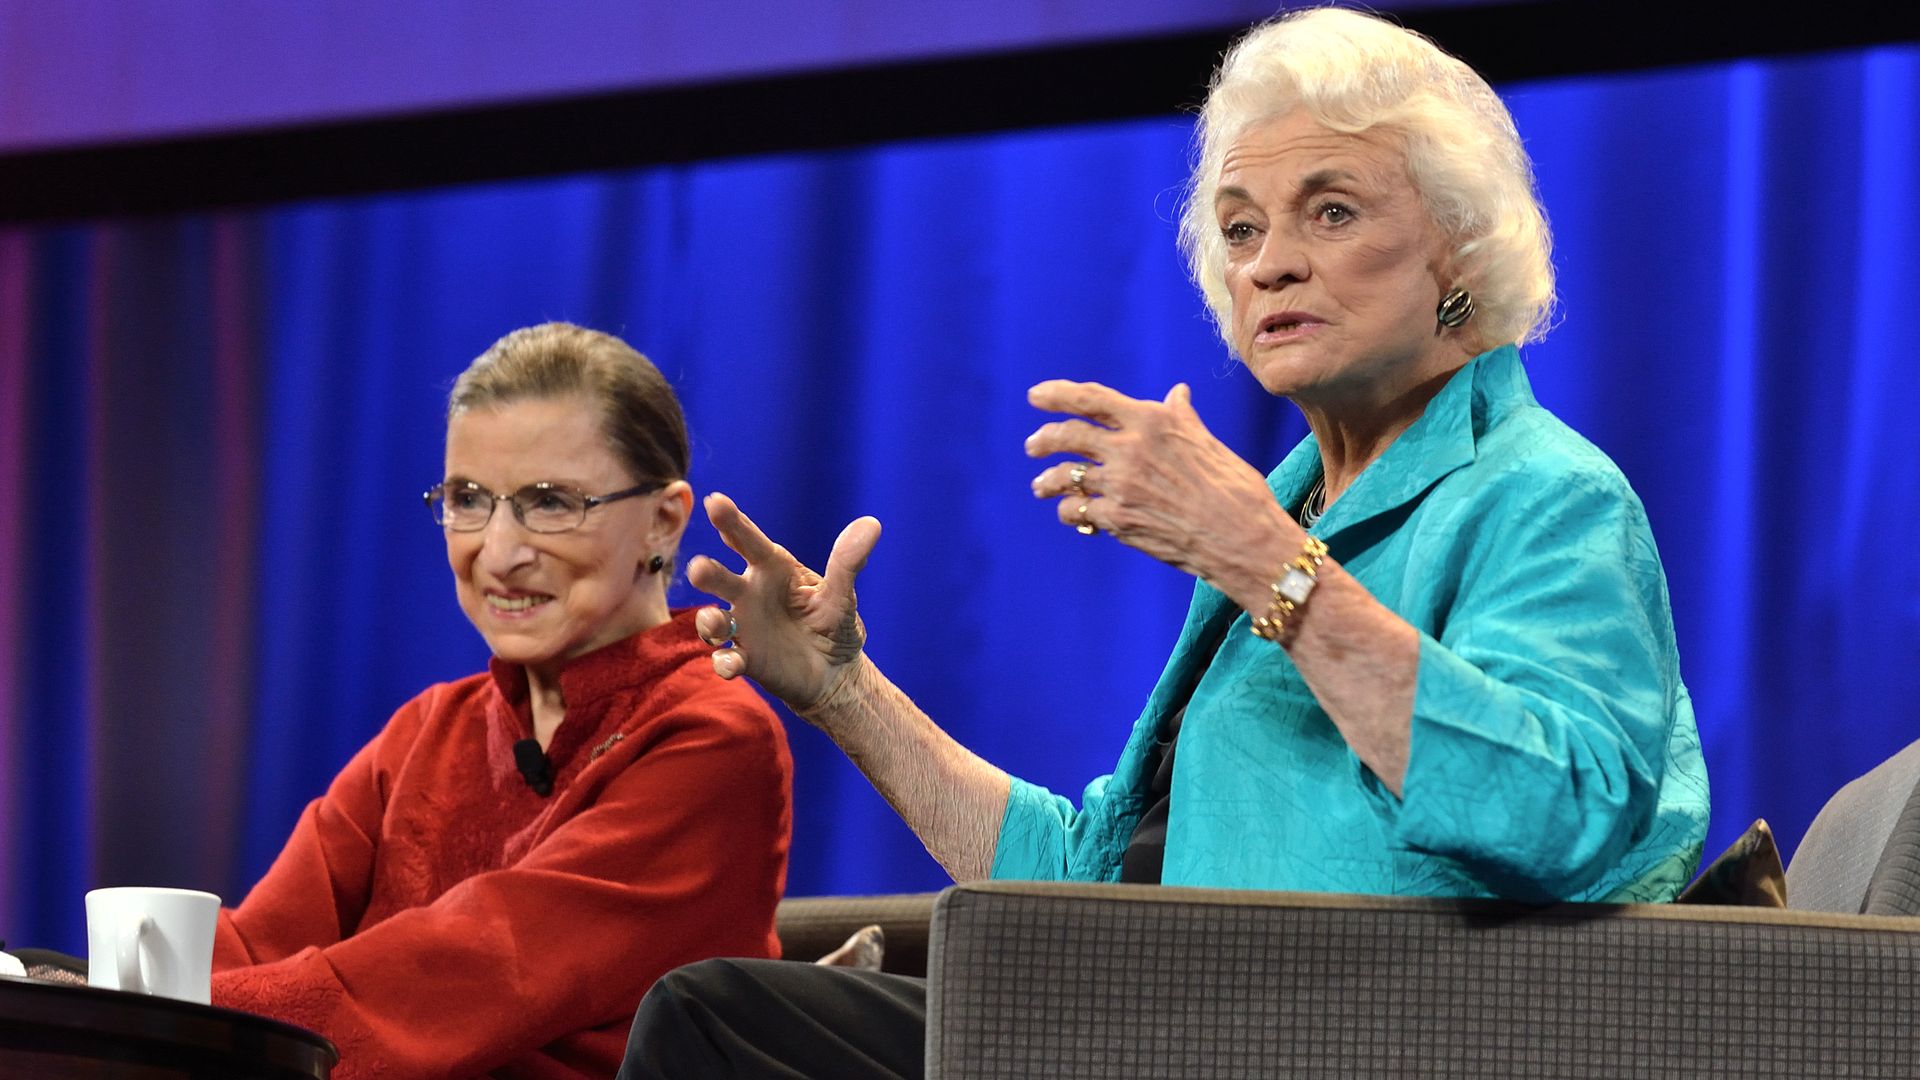 Photo of Ruth Bader Ginsburg in a red button-up shirt and Sandra Day O'Connor in an aqua blazer sitting on stage in a discussion